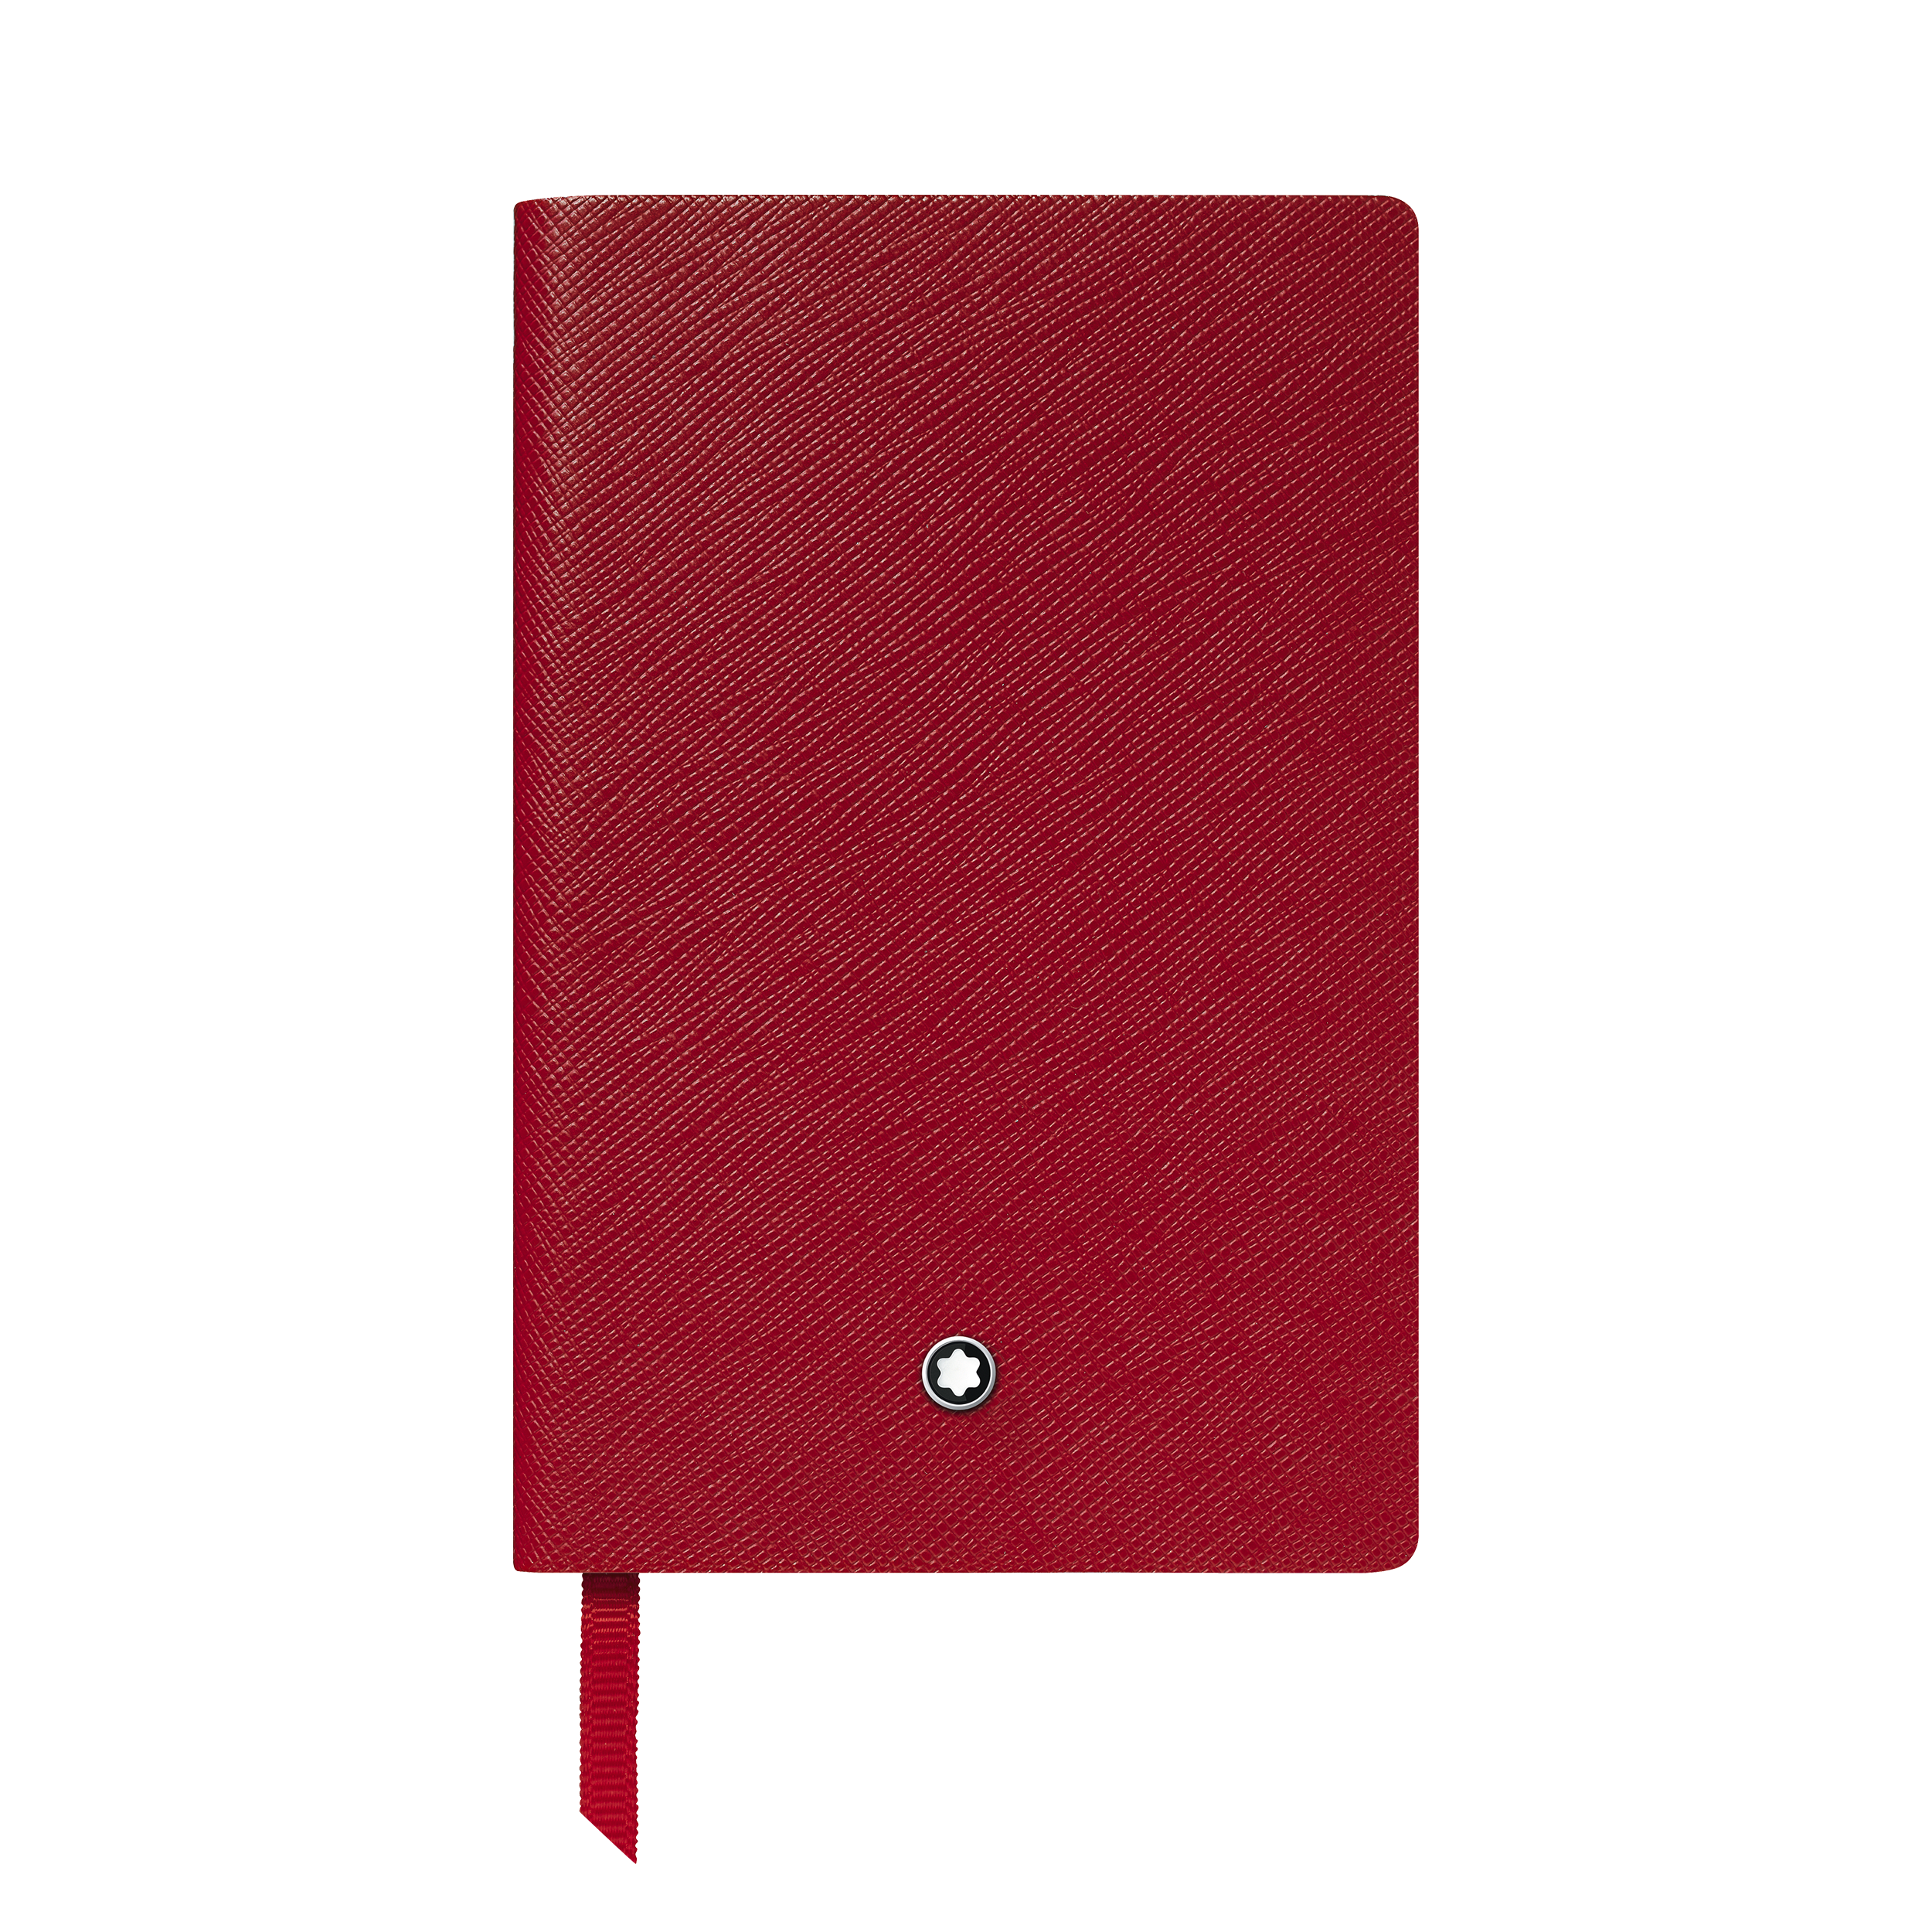 Montblanc Fine Stationery Notebook #148 Red, lined, image 1